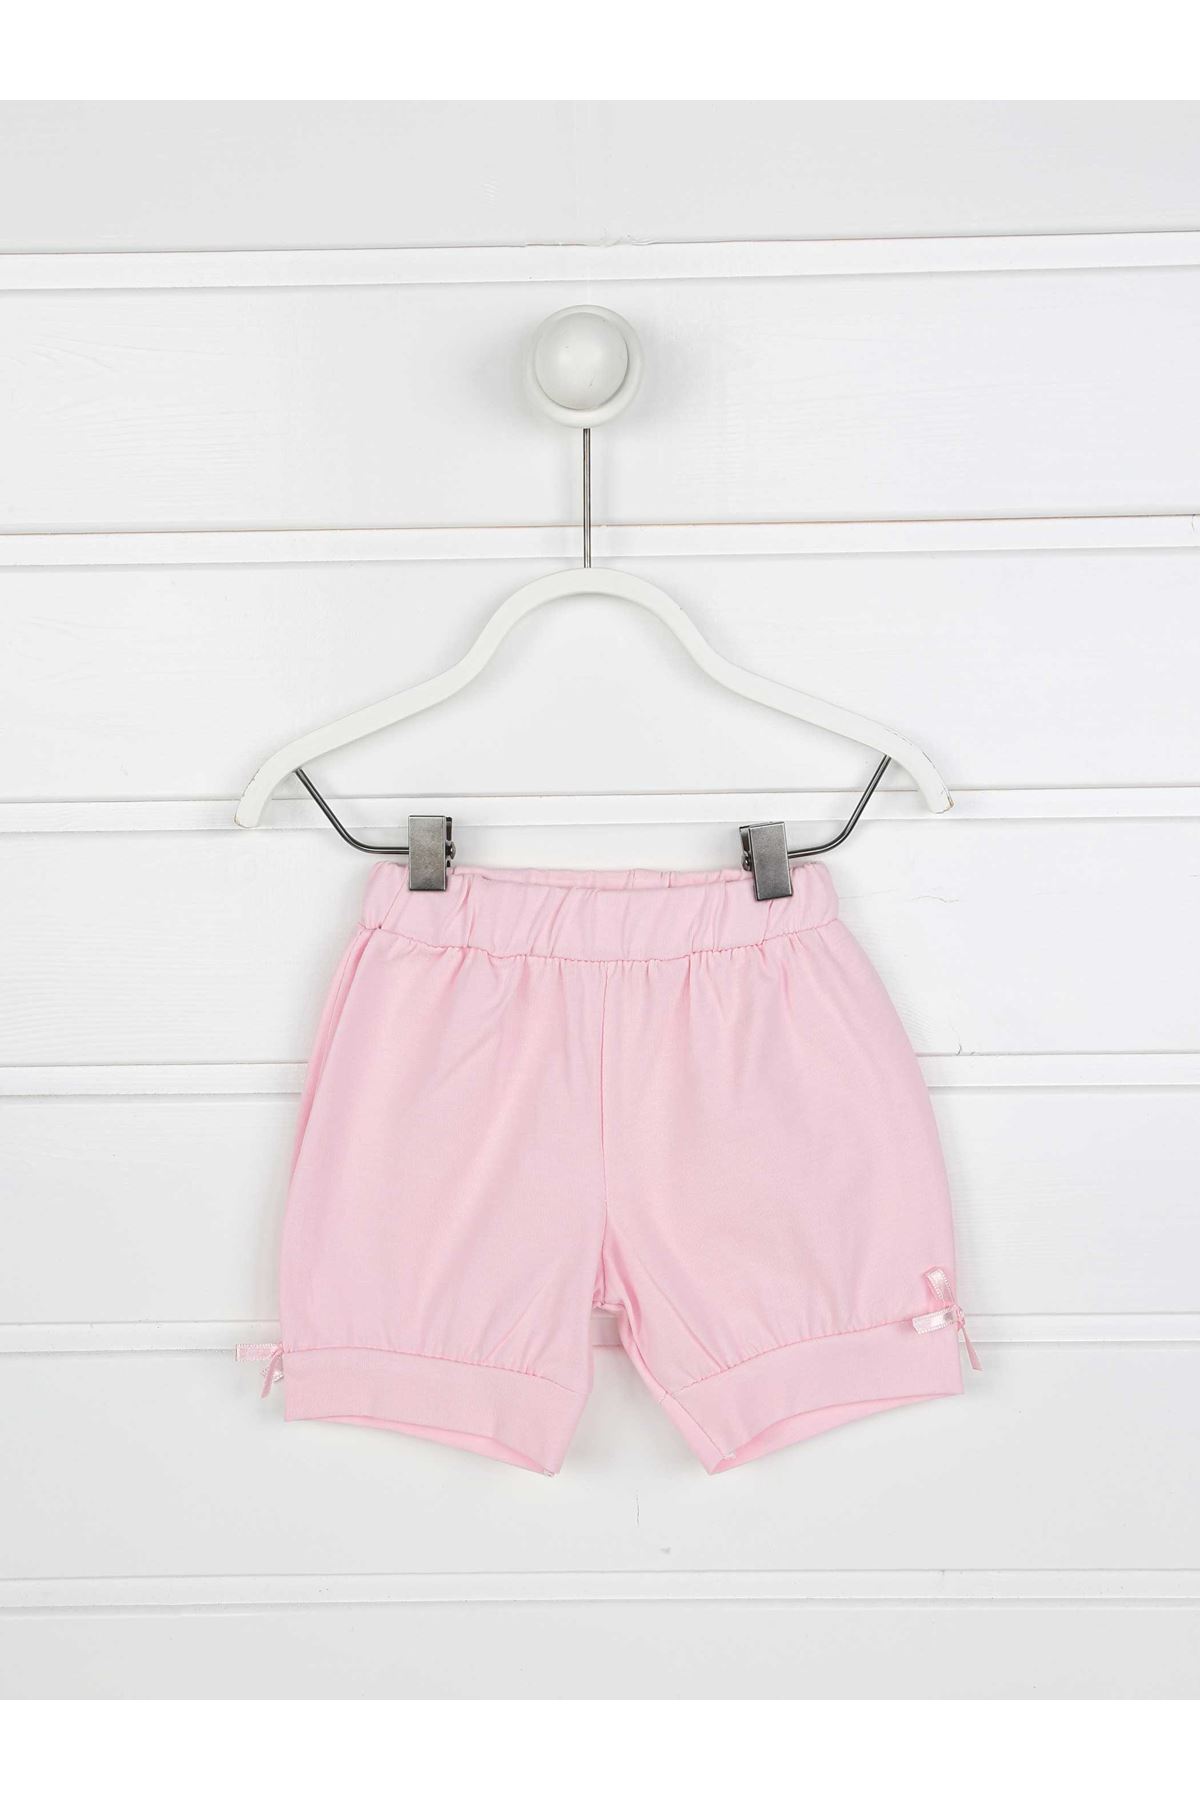 Pink summer baby girl shorts T-shirt 2-piece suit babies models cotton seasonal summer holiday clothes